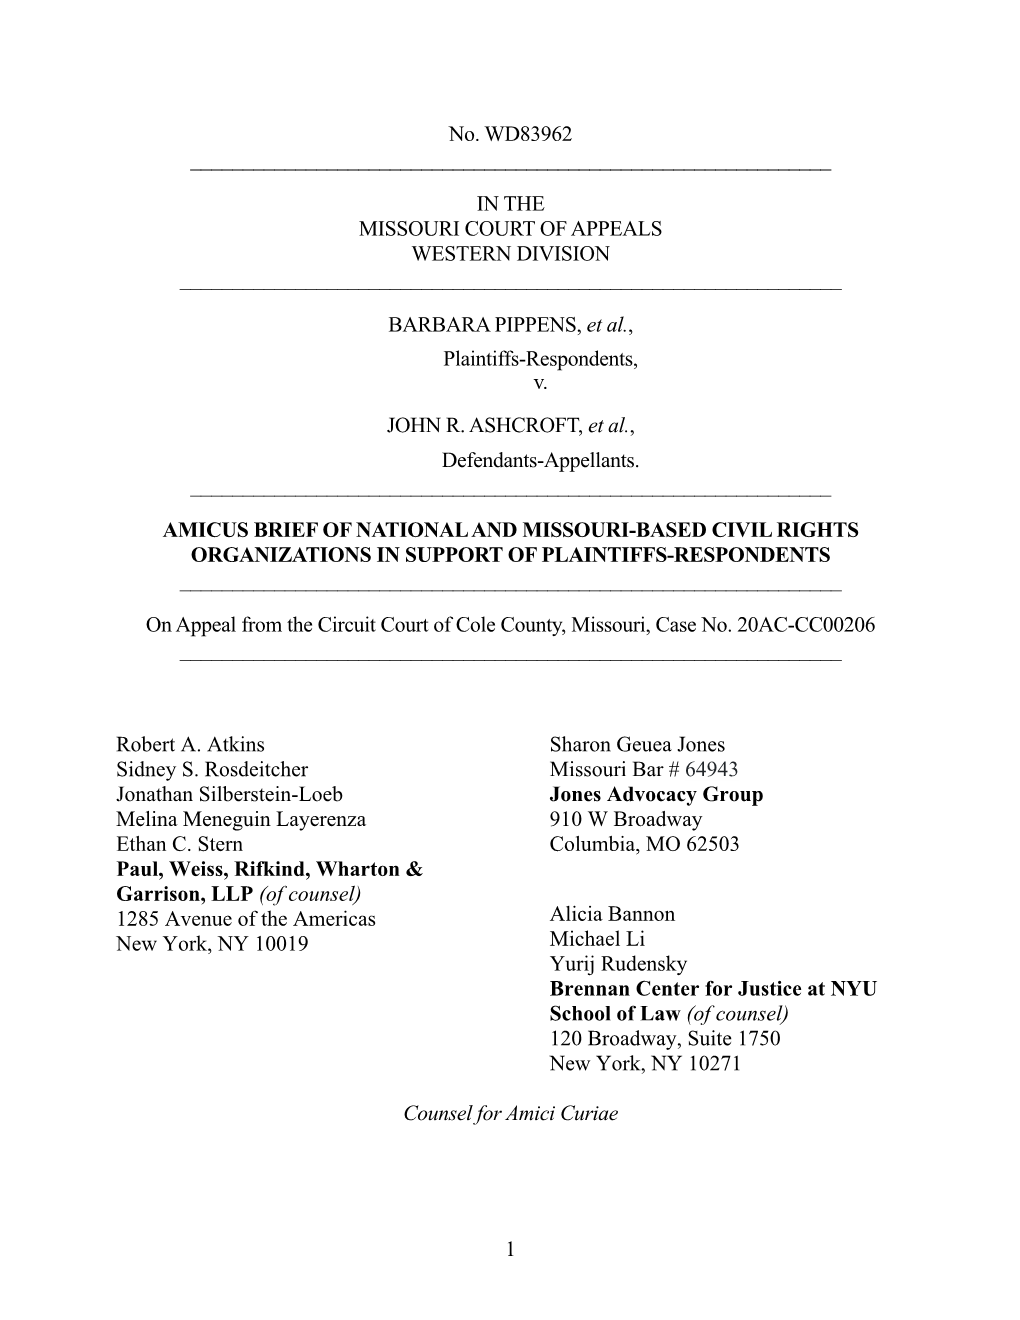 Amicus Brief of National and Missouri-Based Civil Rights Organizations in Support of Plaintiffs-Respondents ______